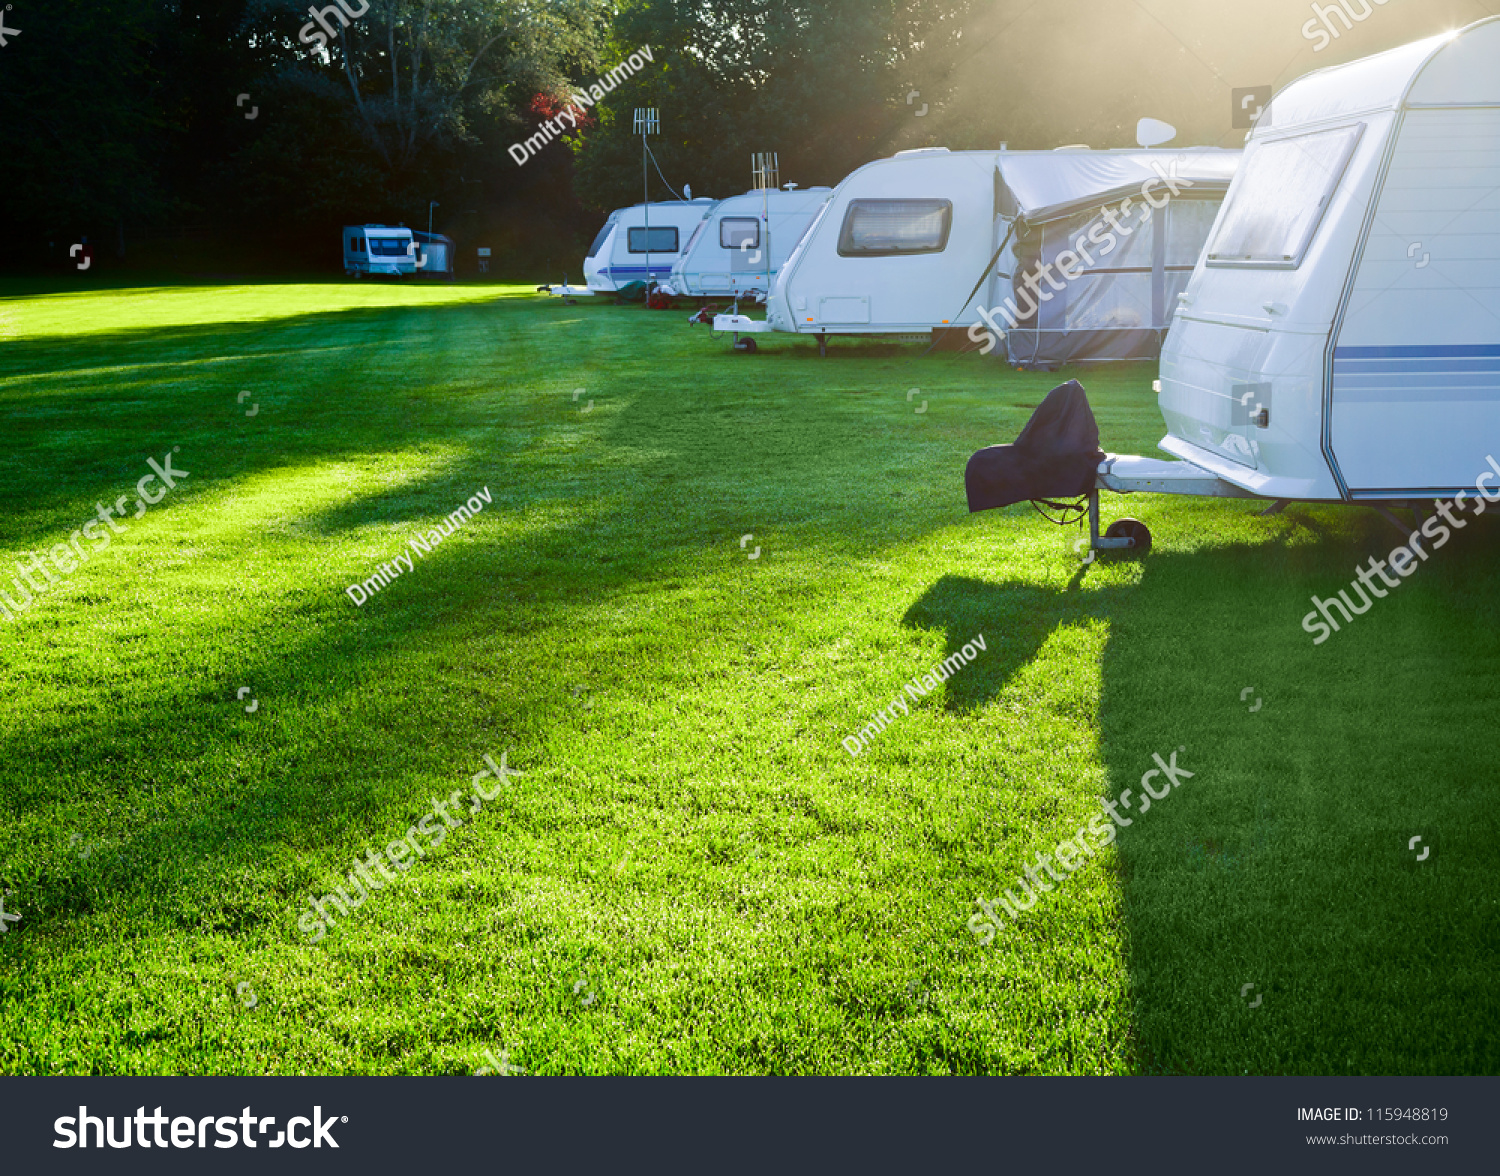 Campsite with caravans in a morning light #115948819